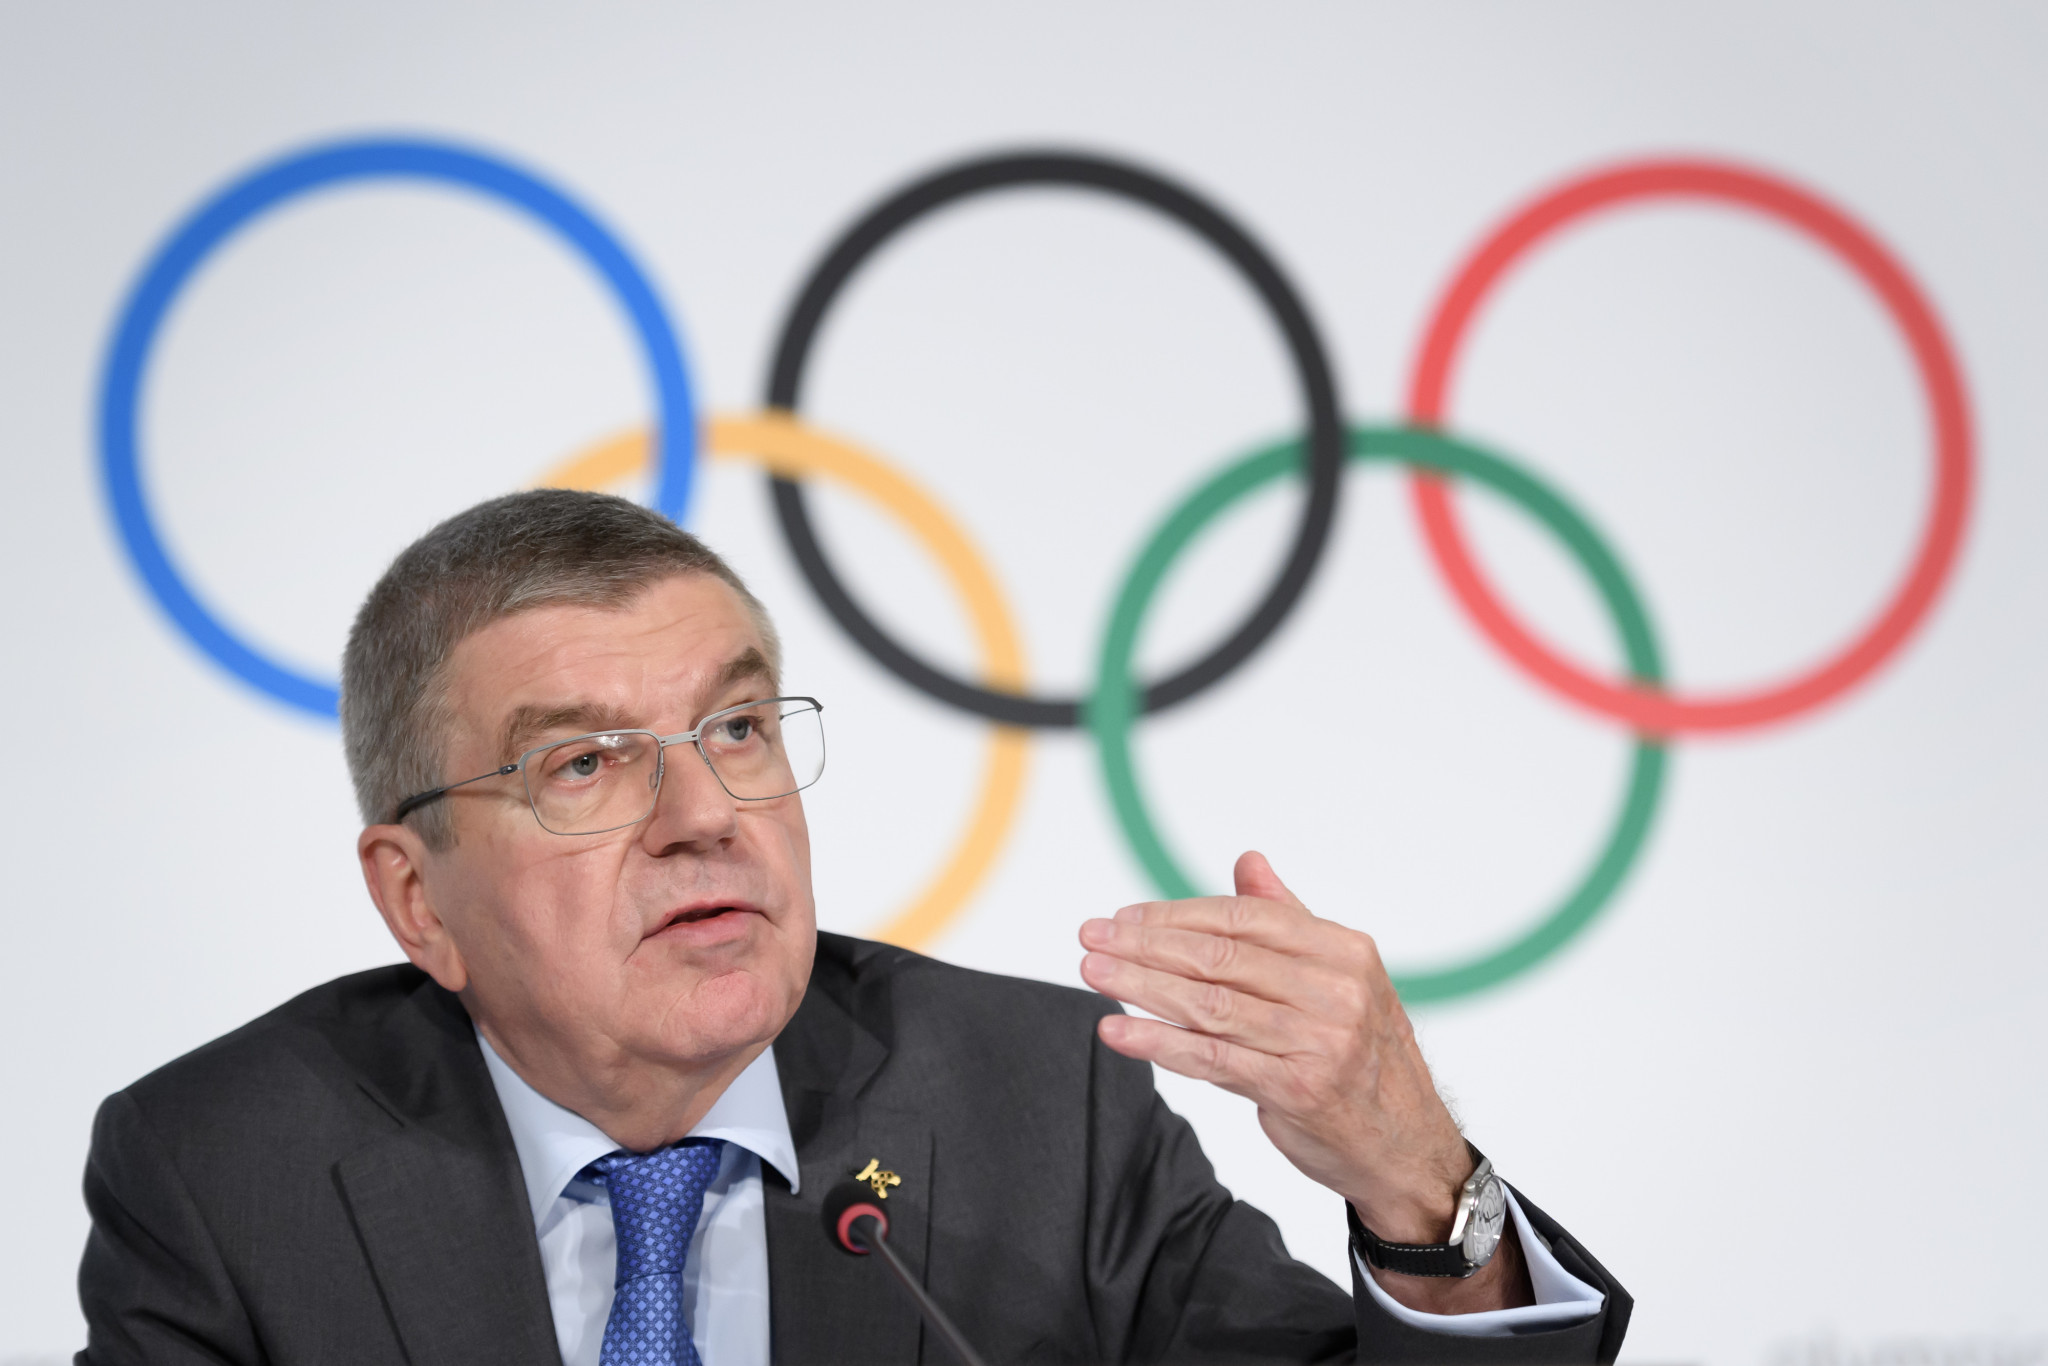 IOC President Thomas Bach claimed earlier this year that guidelines would differ across the NOCs ©Getty Images